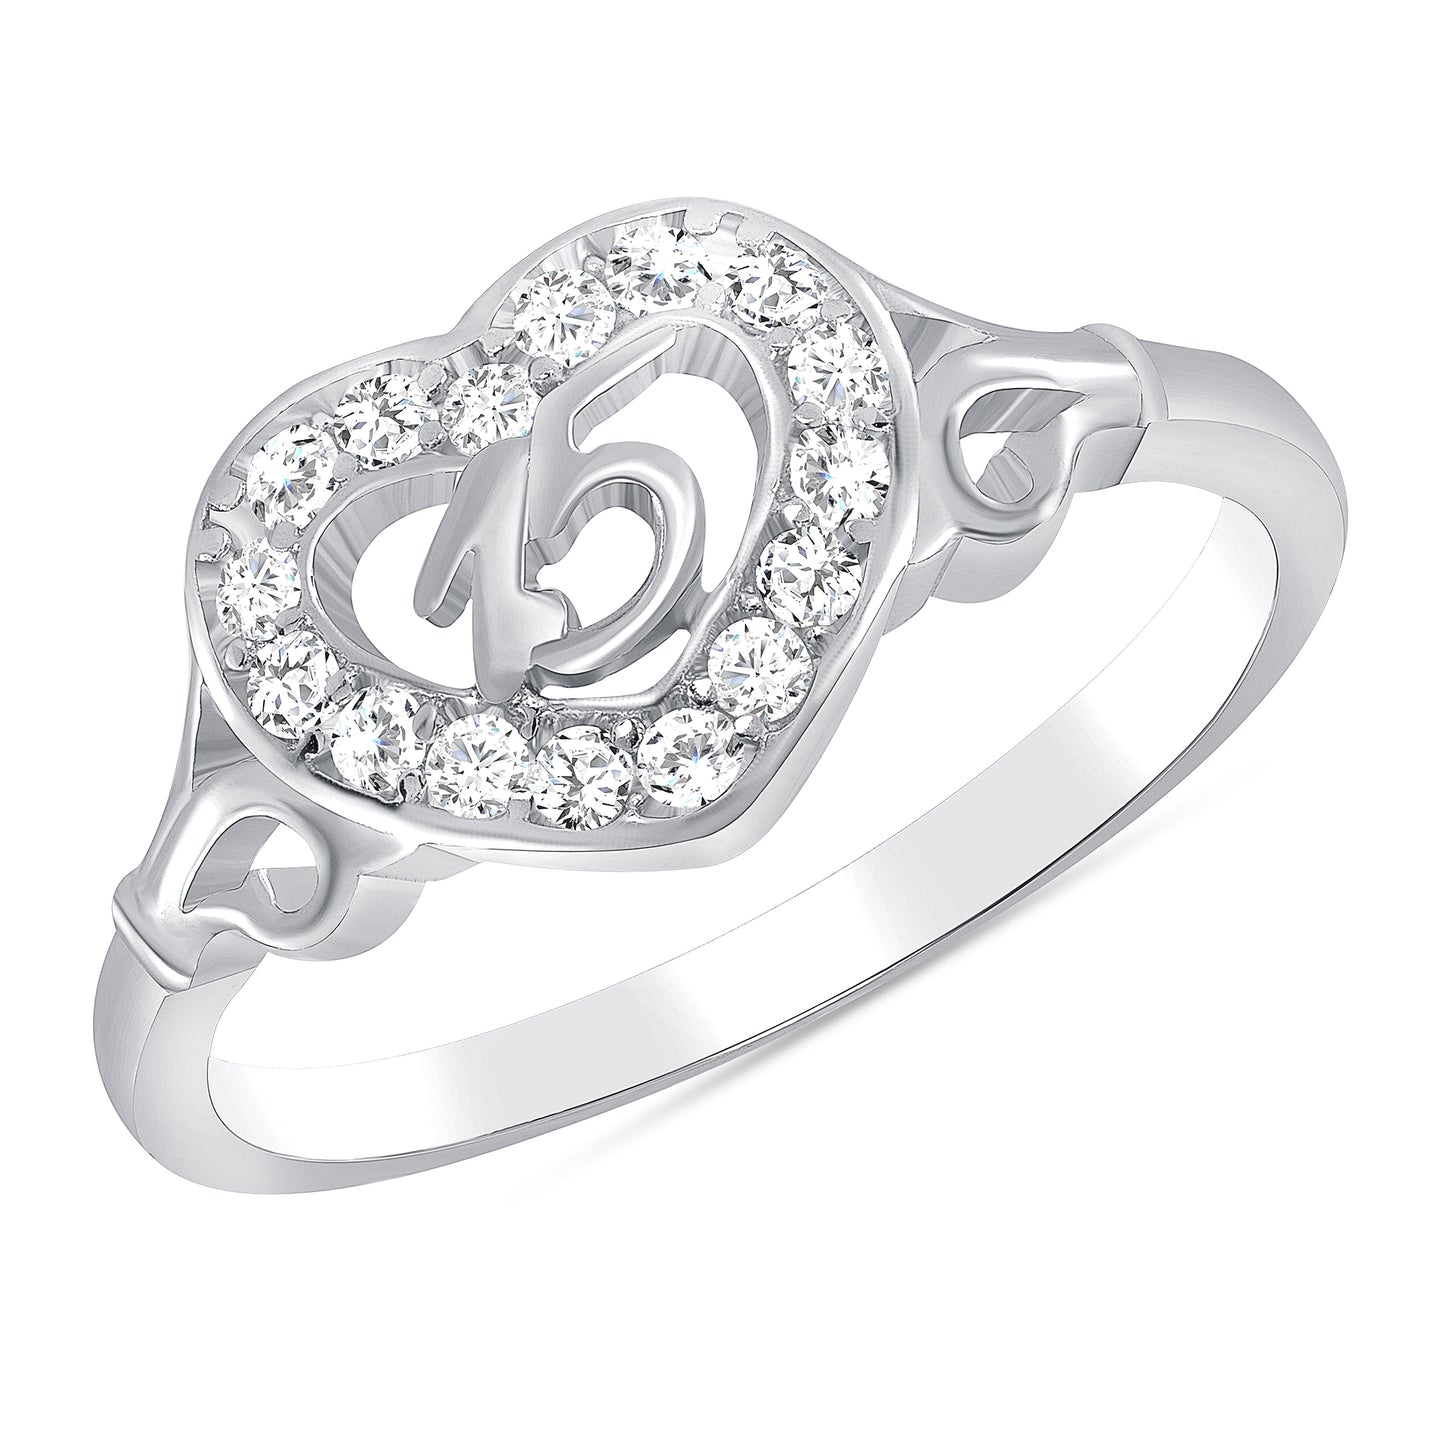 A19804. Silver 925 Rhodium Plated Cubic Zirconia Flower Heart15 Years Ring